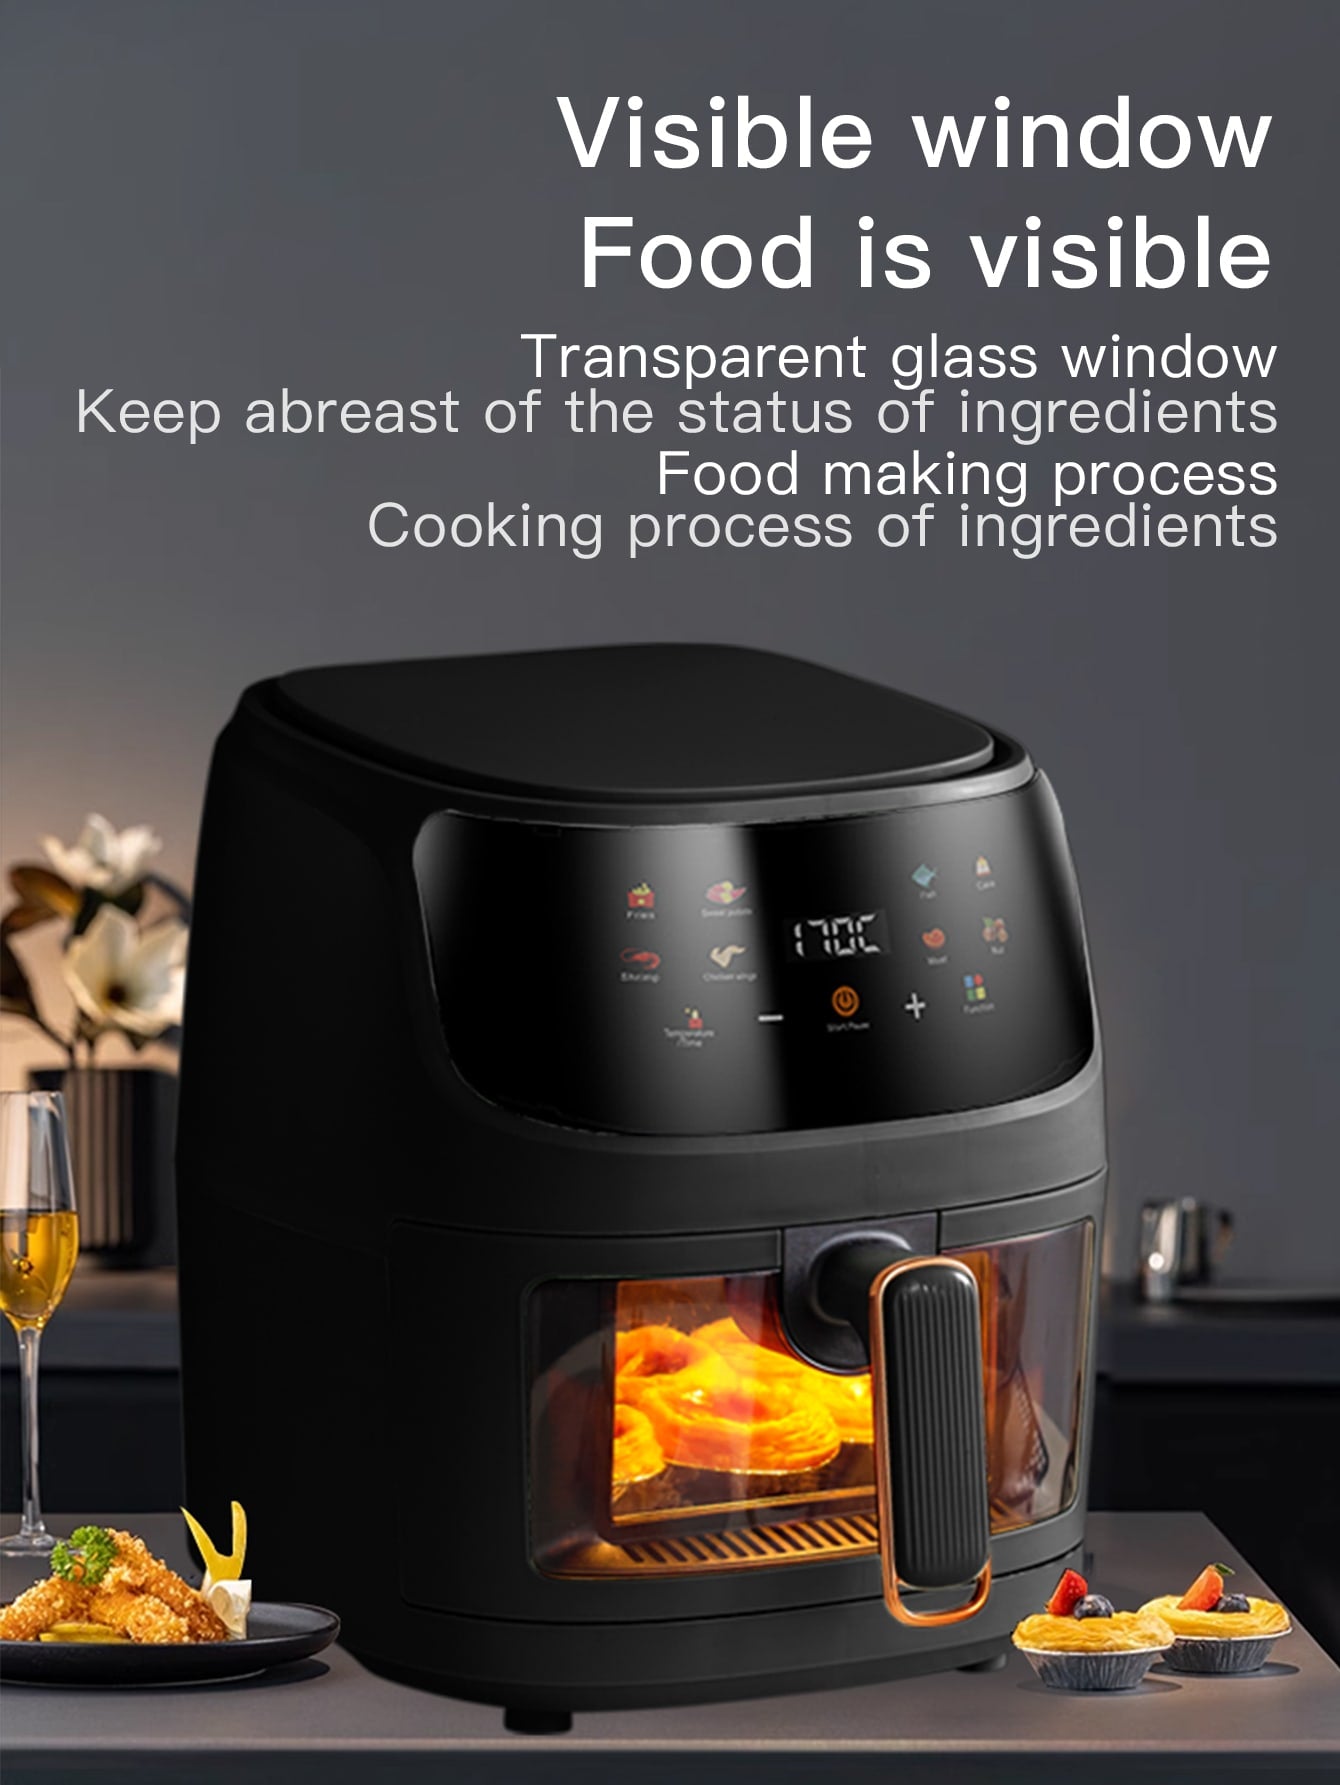 1pc Desktop Electric 6l Large Capacity Multi-functional Visible Air Fryer Qf-606 With Color Touch Screen, Suitable For Party Chicken Wings, Fries, Steak, For Home Cooking-Black-2